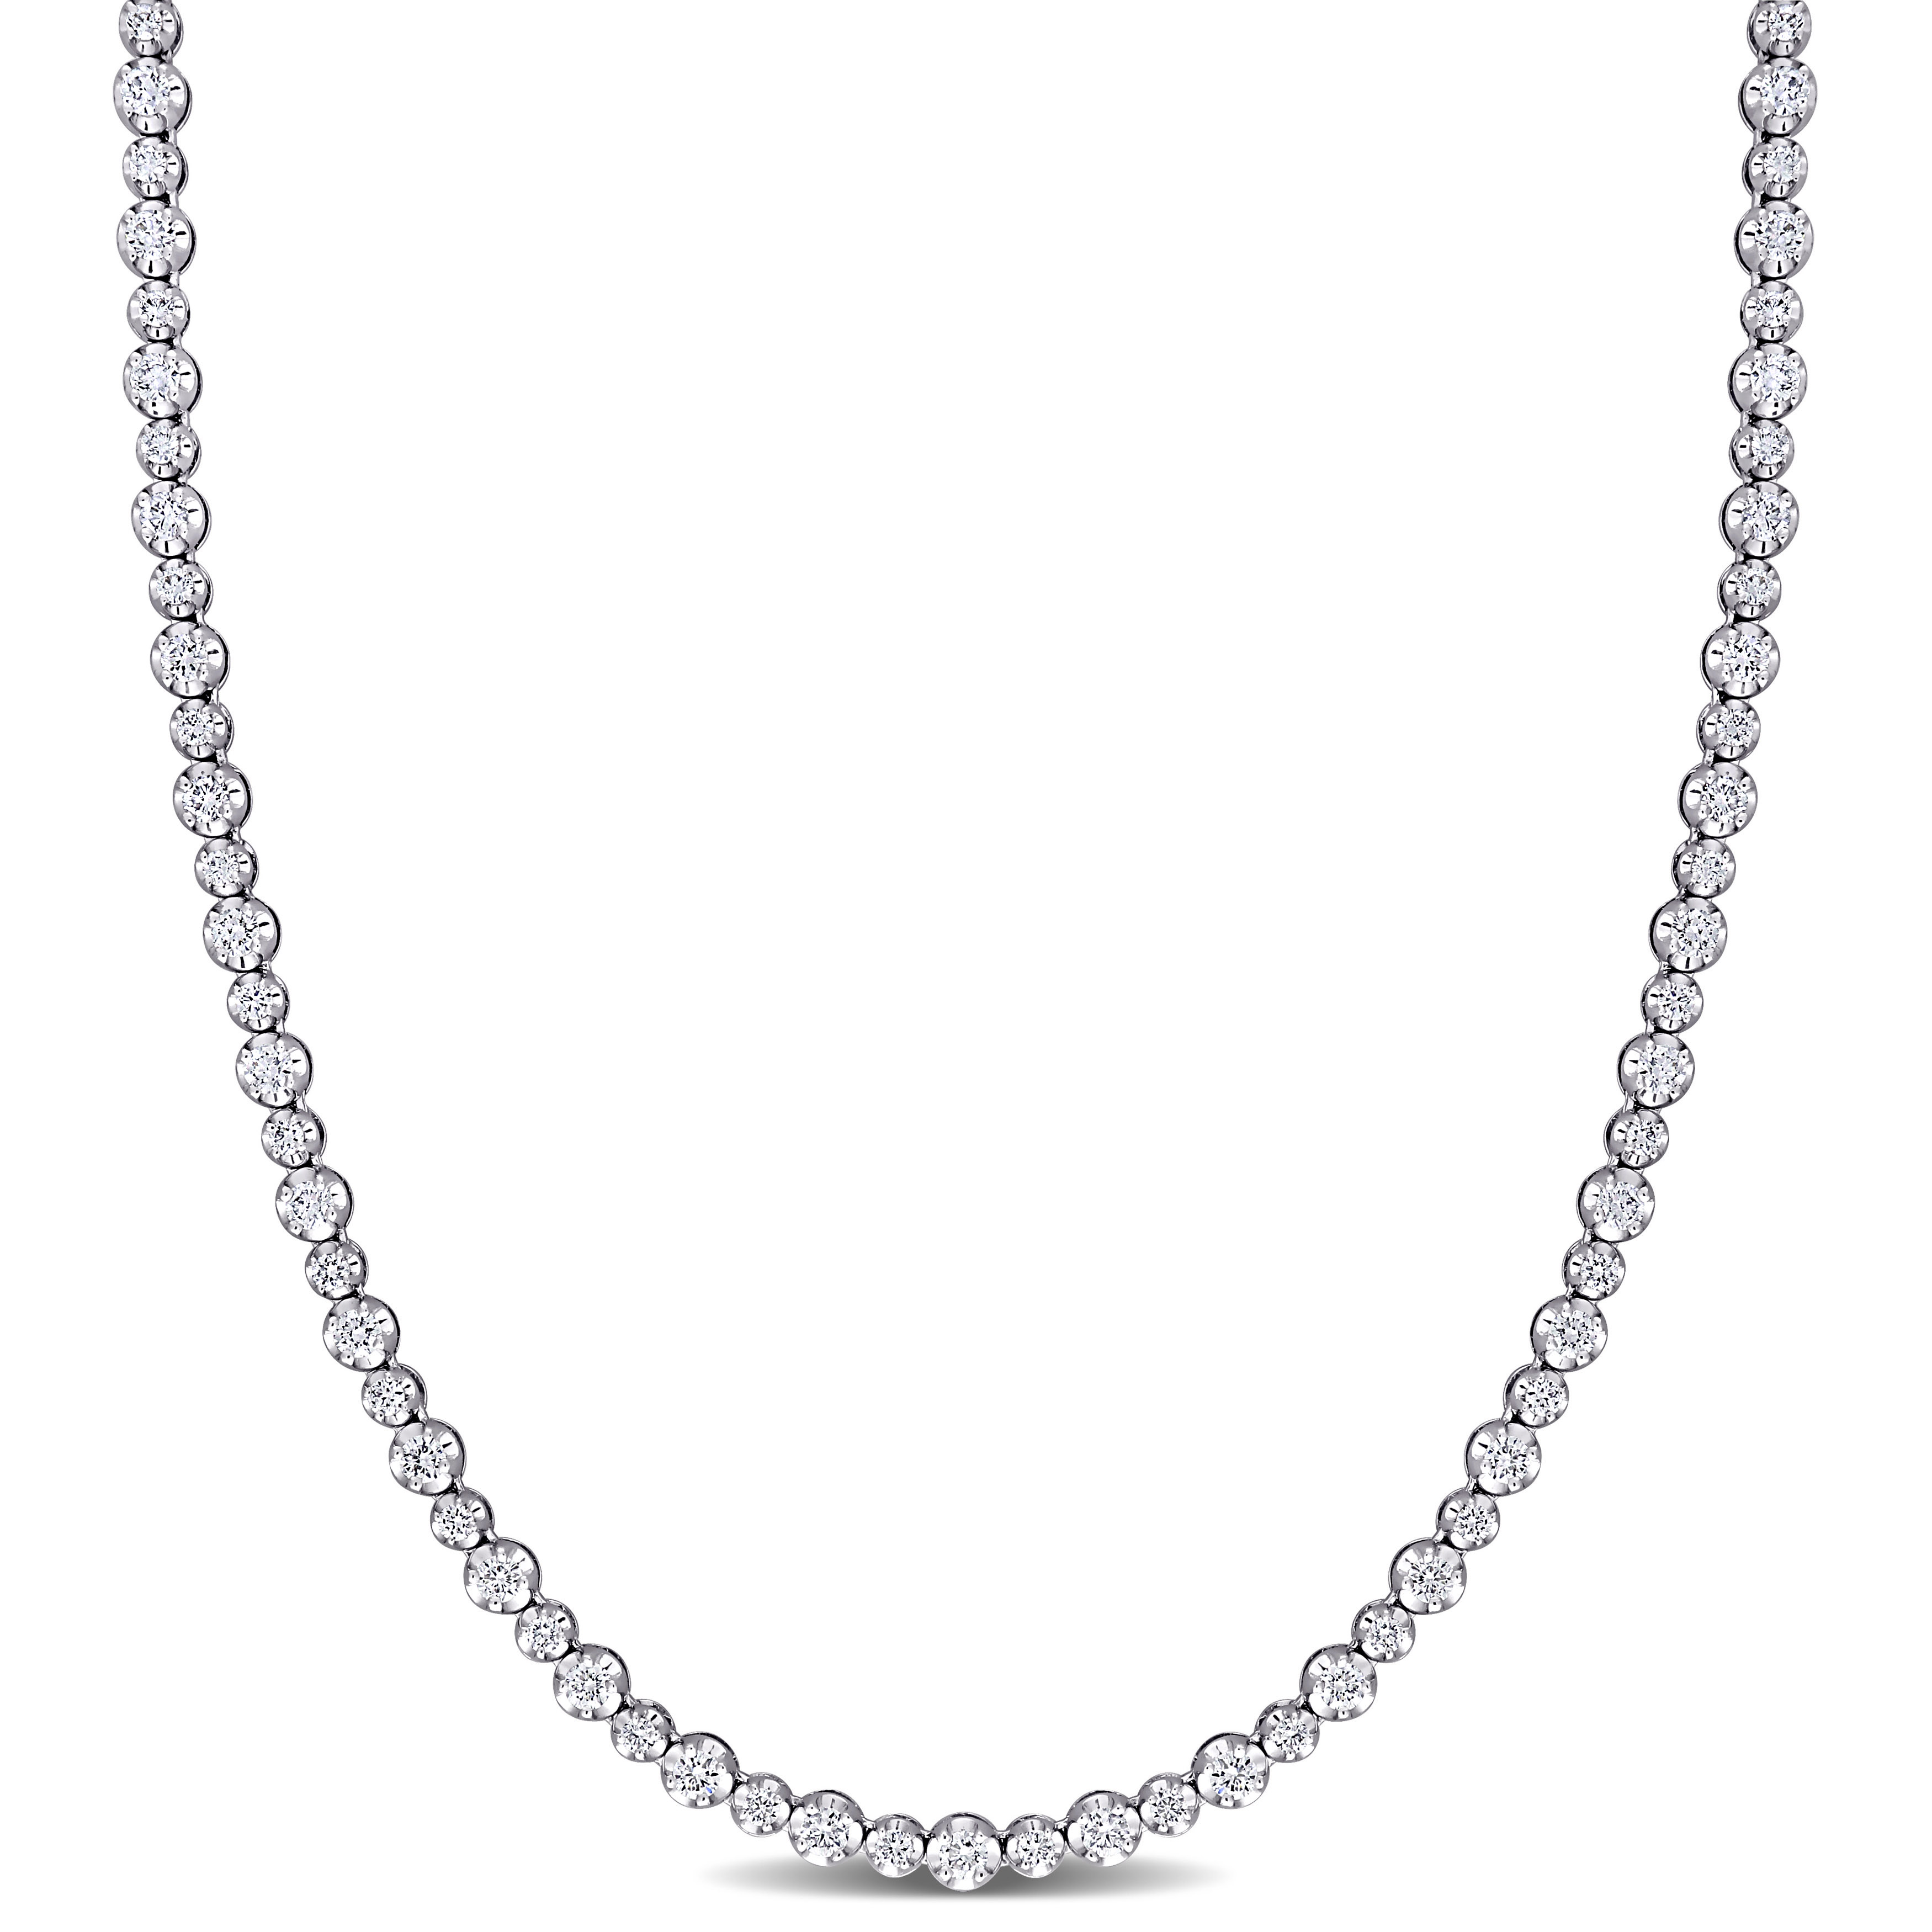 6 3/4 CT TW Diamond Tennis Necklace in 14k White Gold - 32 in